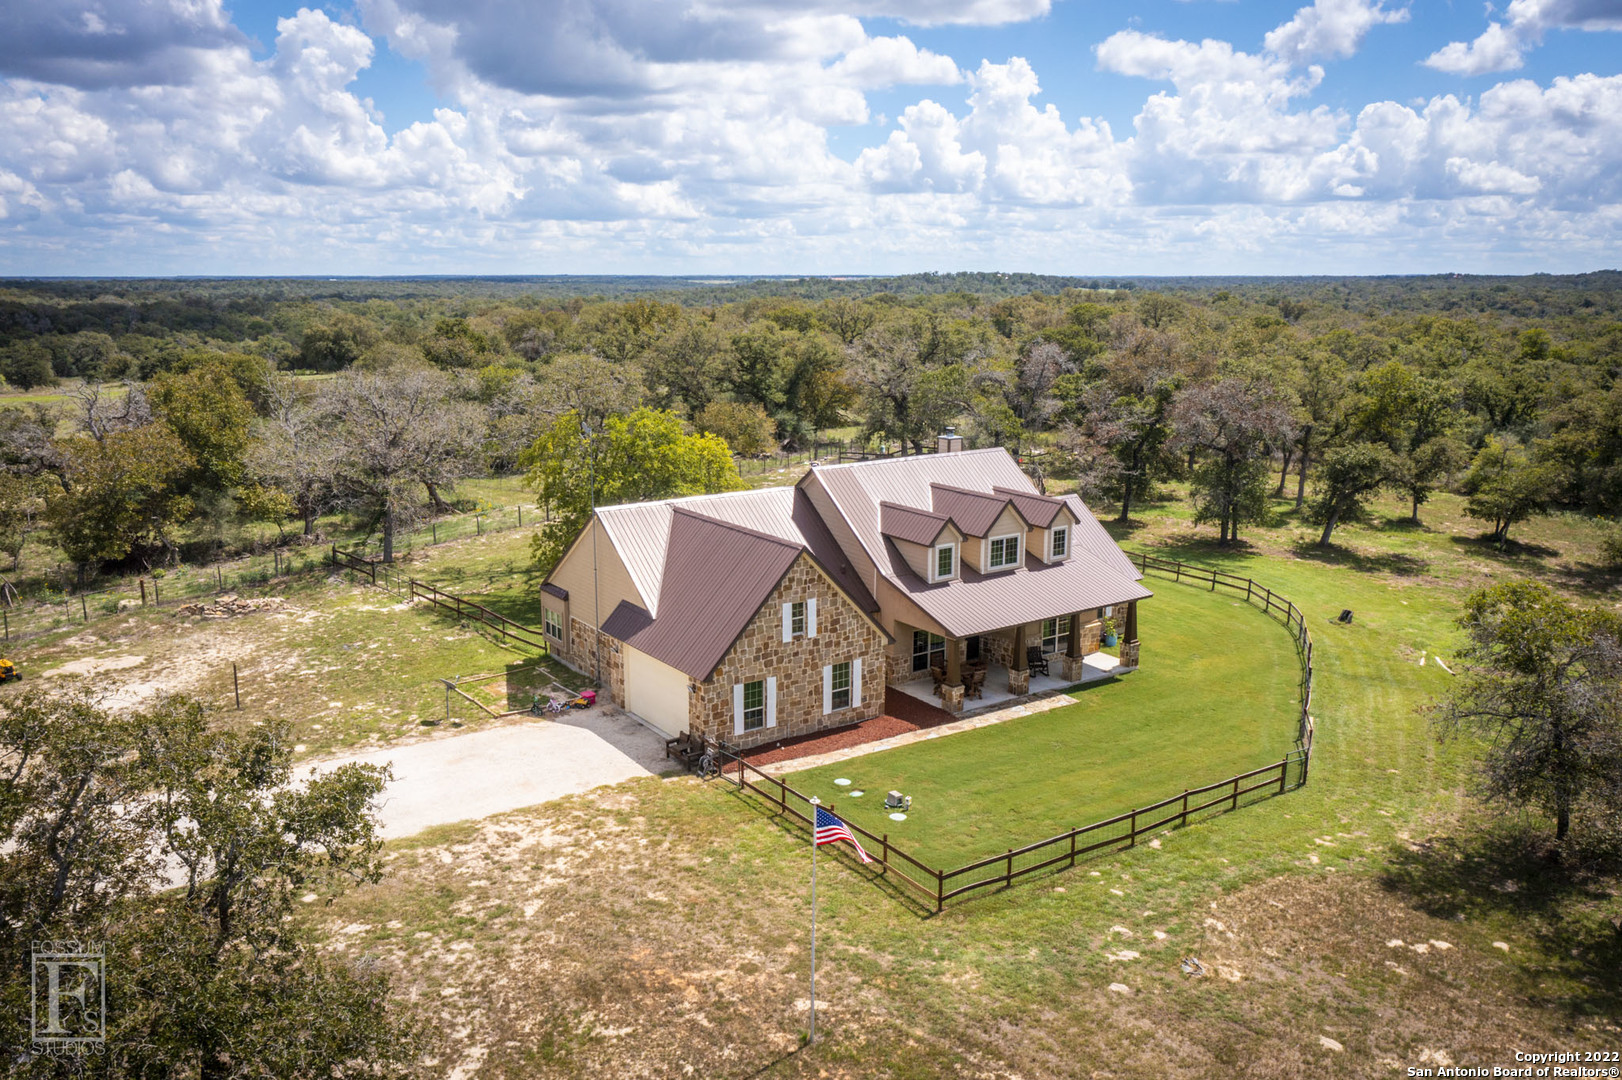 Beautiful 3 BR, 2.5 BA home+office home built in 2015 on 10 acres, hunting allowed. Rock & stucco exterior, metal roof, w/ a great inviting covered front porch, covered back porch, extended rock patio, garden area & hot tub.The property is completely fenced w/ electric drive through gate, sprinkler system & sodded around the house, property on a well, water softener & SOLAR PANELS! Head inside this 1 story home, to the right is a large study, to the left an open formal dining space. The large master suite is conveniently located across from the utility room. Large master bath with huge walk in closet. On the other side of the house are 2 add'l guest BR w/ a shared guest bath, plus a computer desk nook. The living room & kitchen are open to each other, the back wall is lined w/ windows, great views & lots of natural sunlight, wood burning fireplace w/ stone surround, concrete floors, large kitchen w/ warm wood cabinetry, granite countertops, double wall Electrolux ovens & dishwasher, electric cook top, built in convection microwave. The covered back patio gets afternoon shade, extended rock patio, hot tub conveys.  Gardens, chicken coups, 100x100 dry tank, ranch fencing, mature trees, secluded!